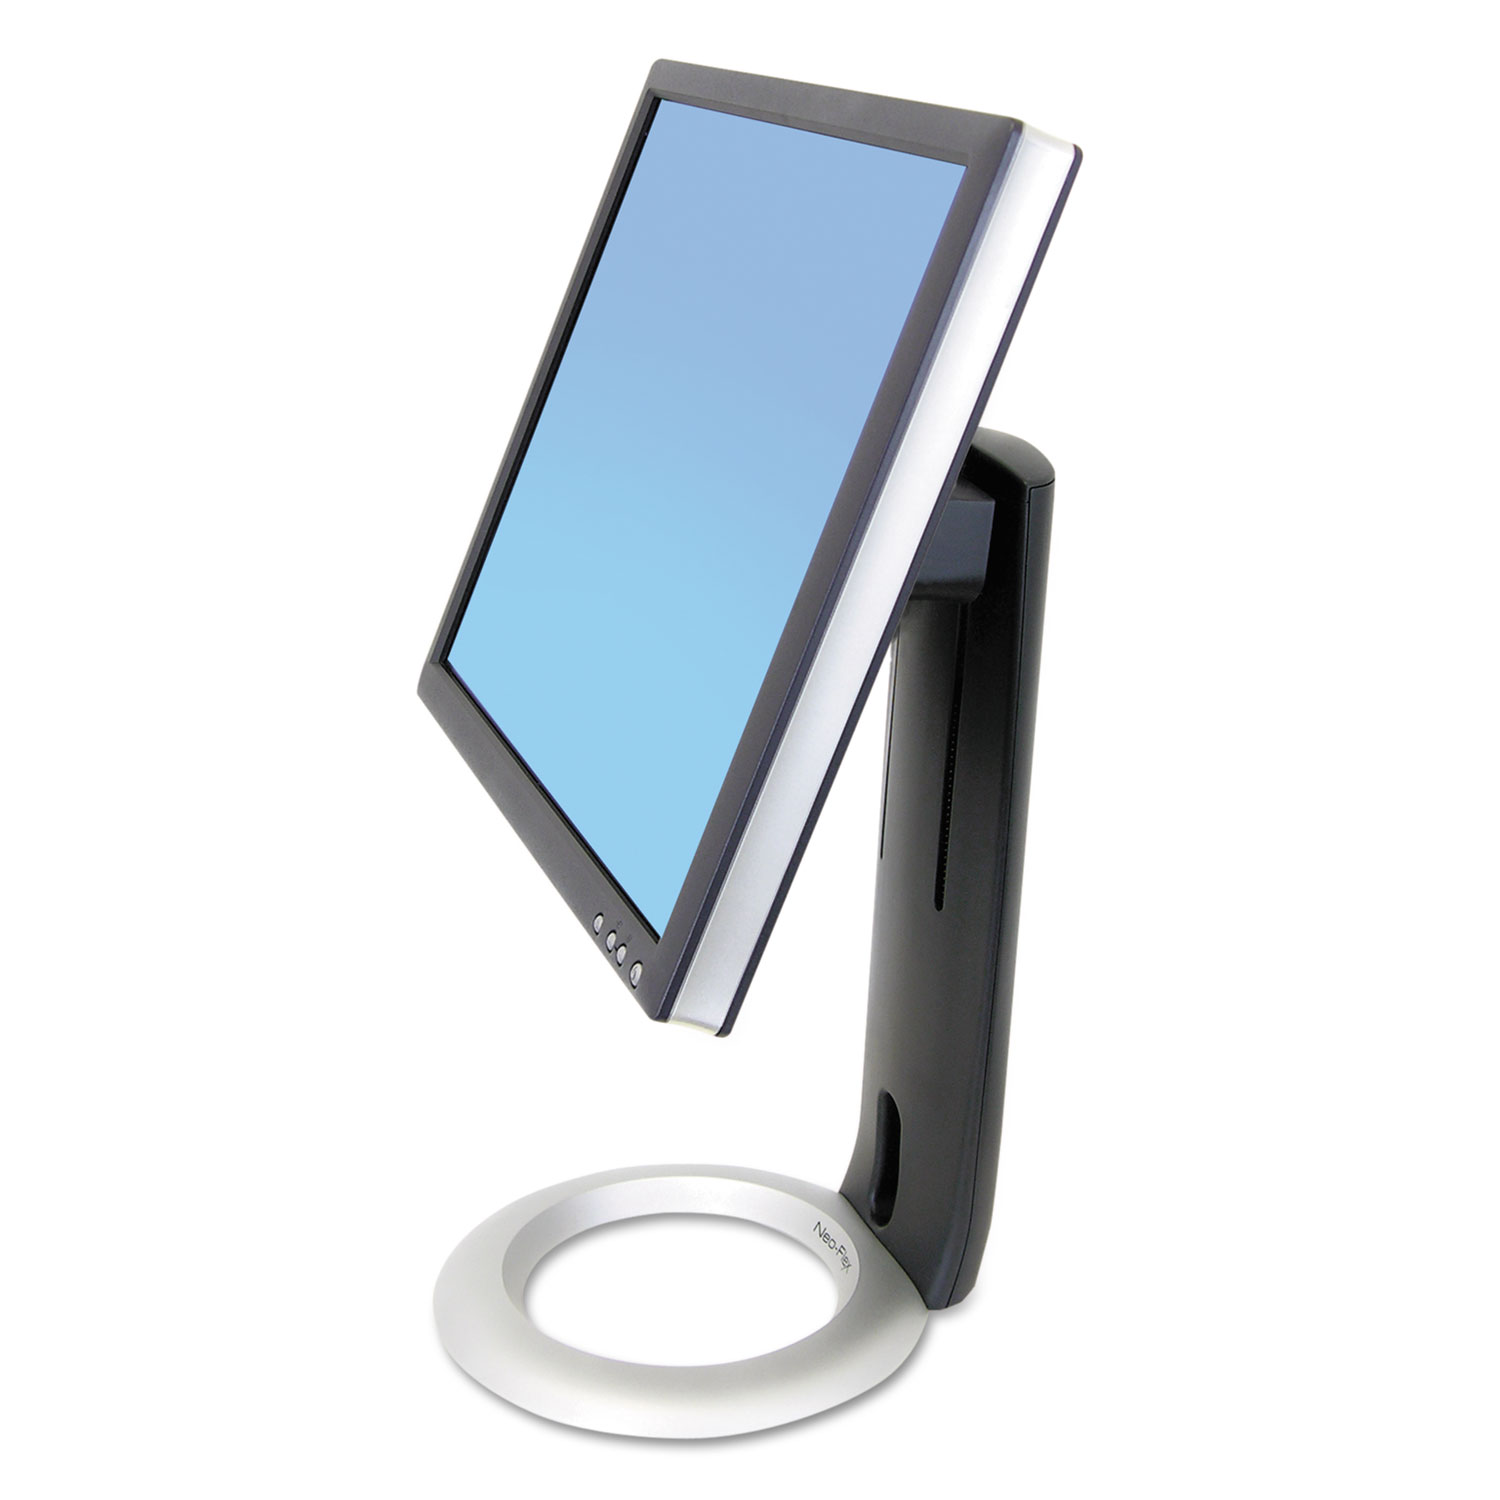  Ergotron 33-310-060 Neo-Flex LCD Stand for LCDs up to 24, Black/Silver (ERG33310060) 